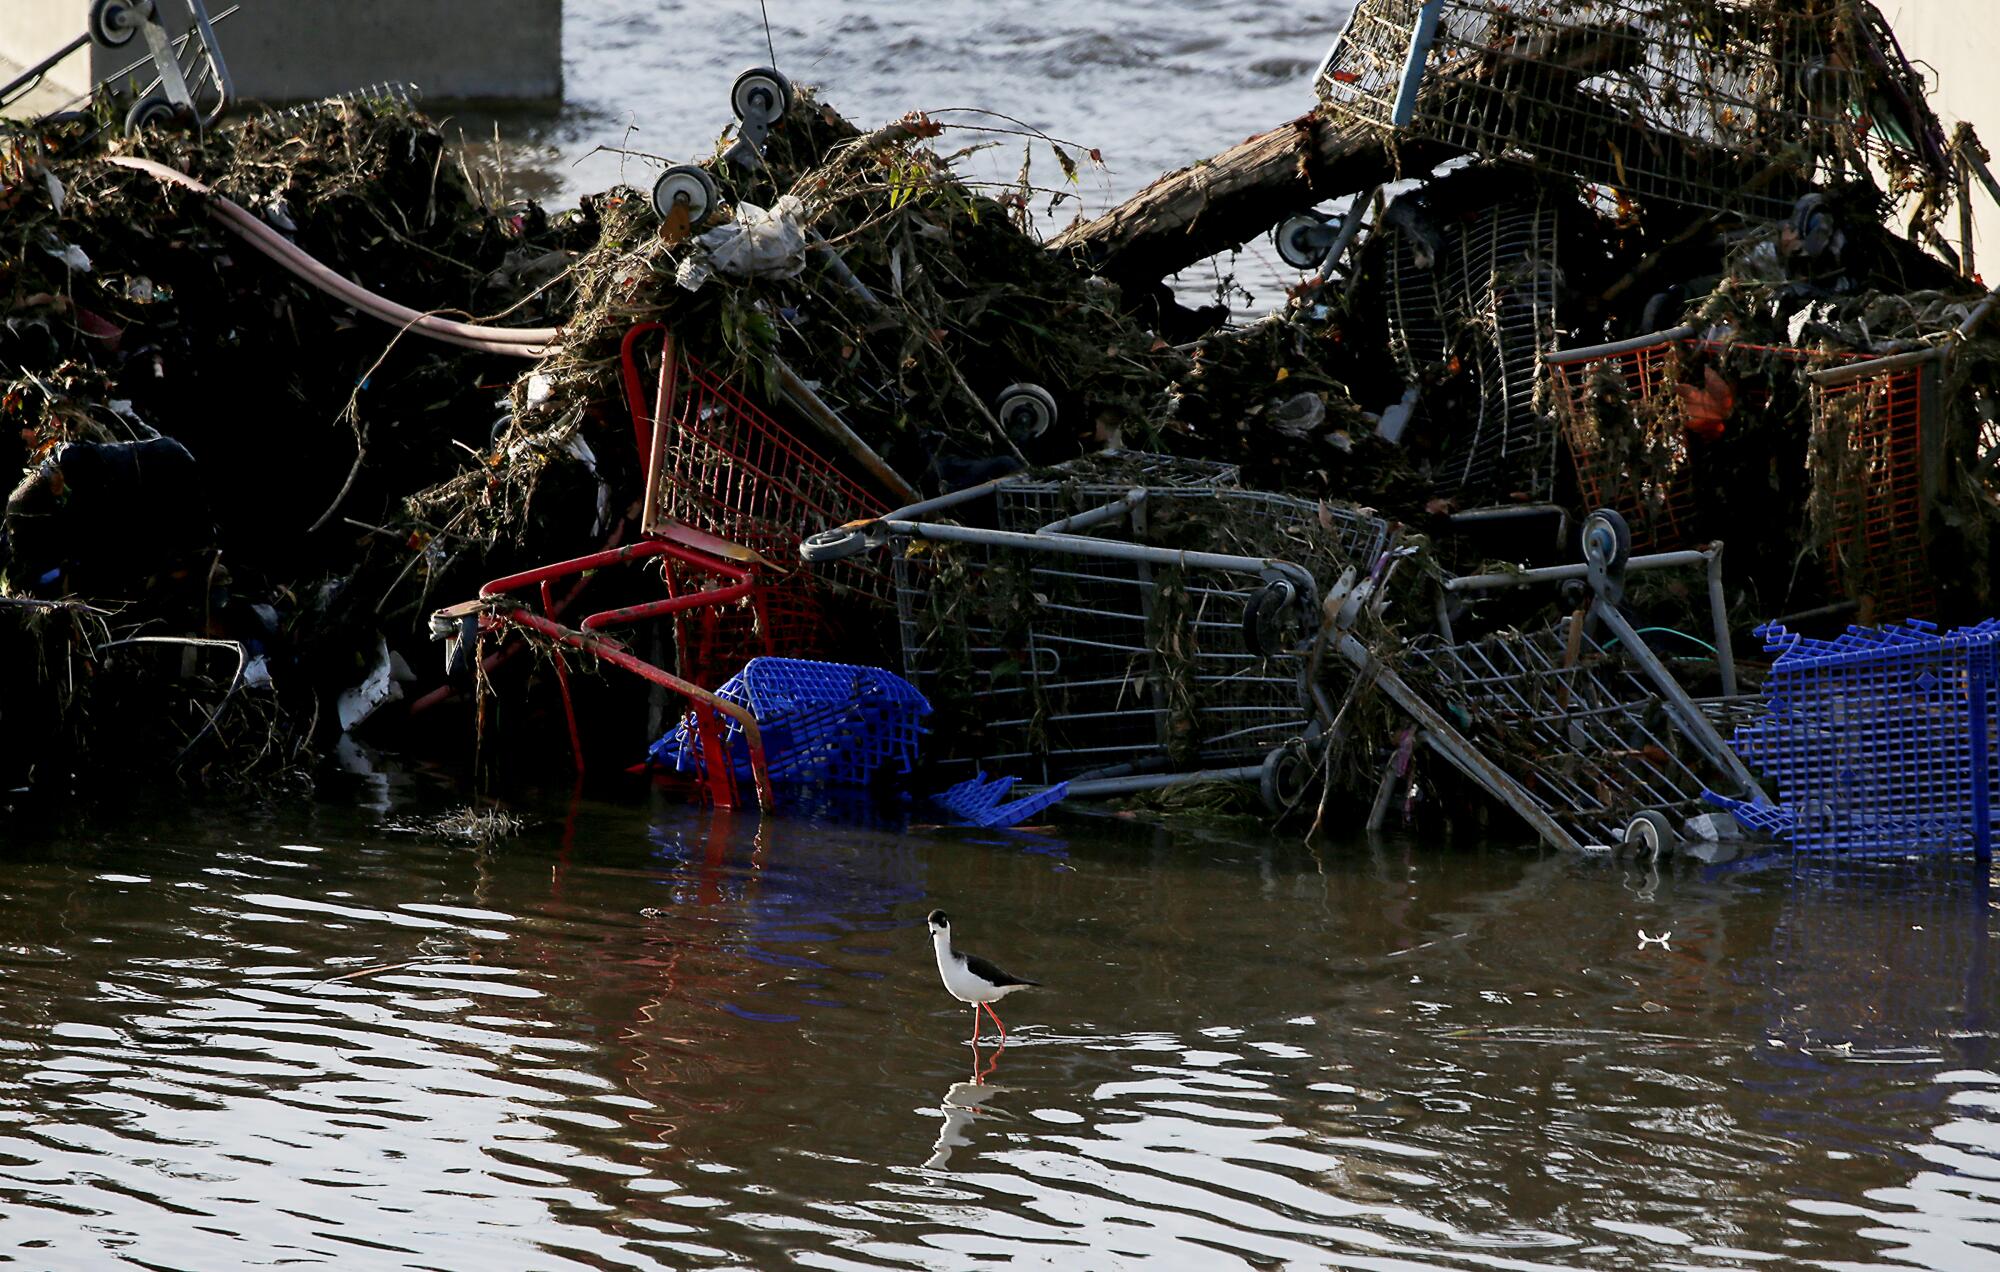 A bird stands near a jumbled mass of shopping carts and debris inundated by water